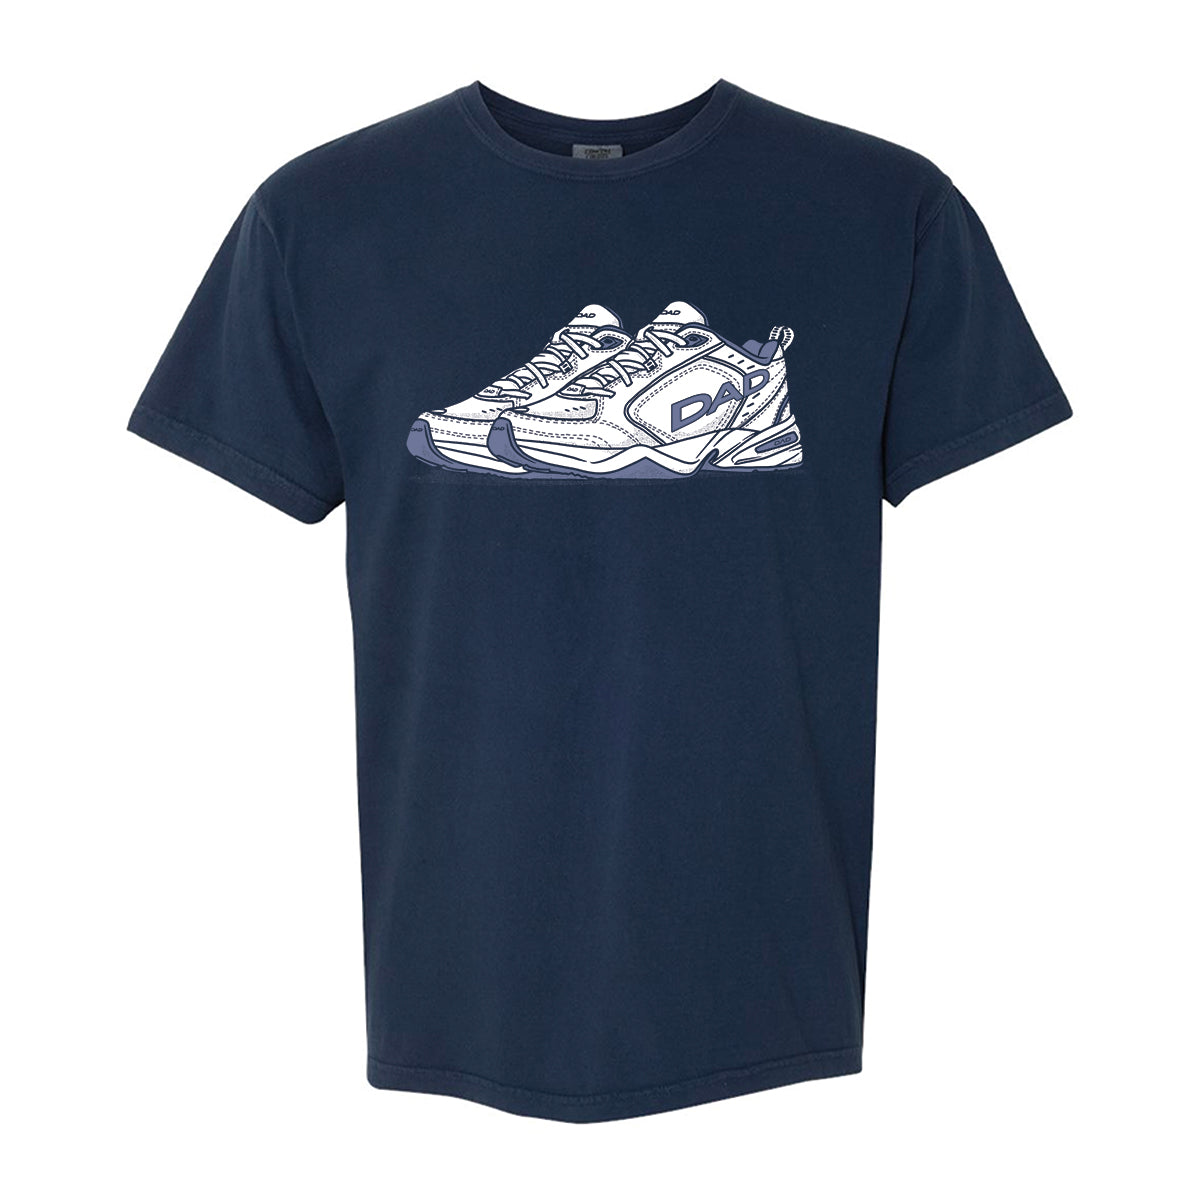 Dad Sneakers Graphic Tee-T-Shirts-Barstool Chicago-Navy-S-Barstool Sports